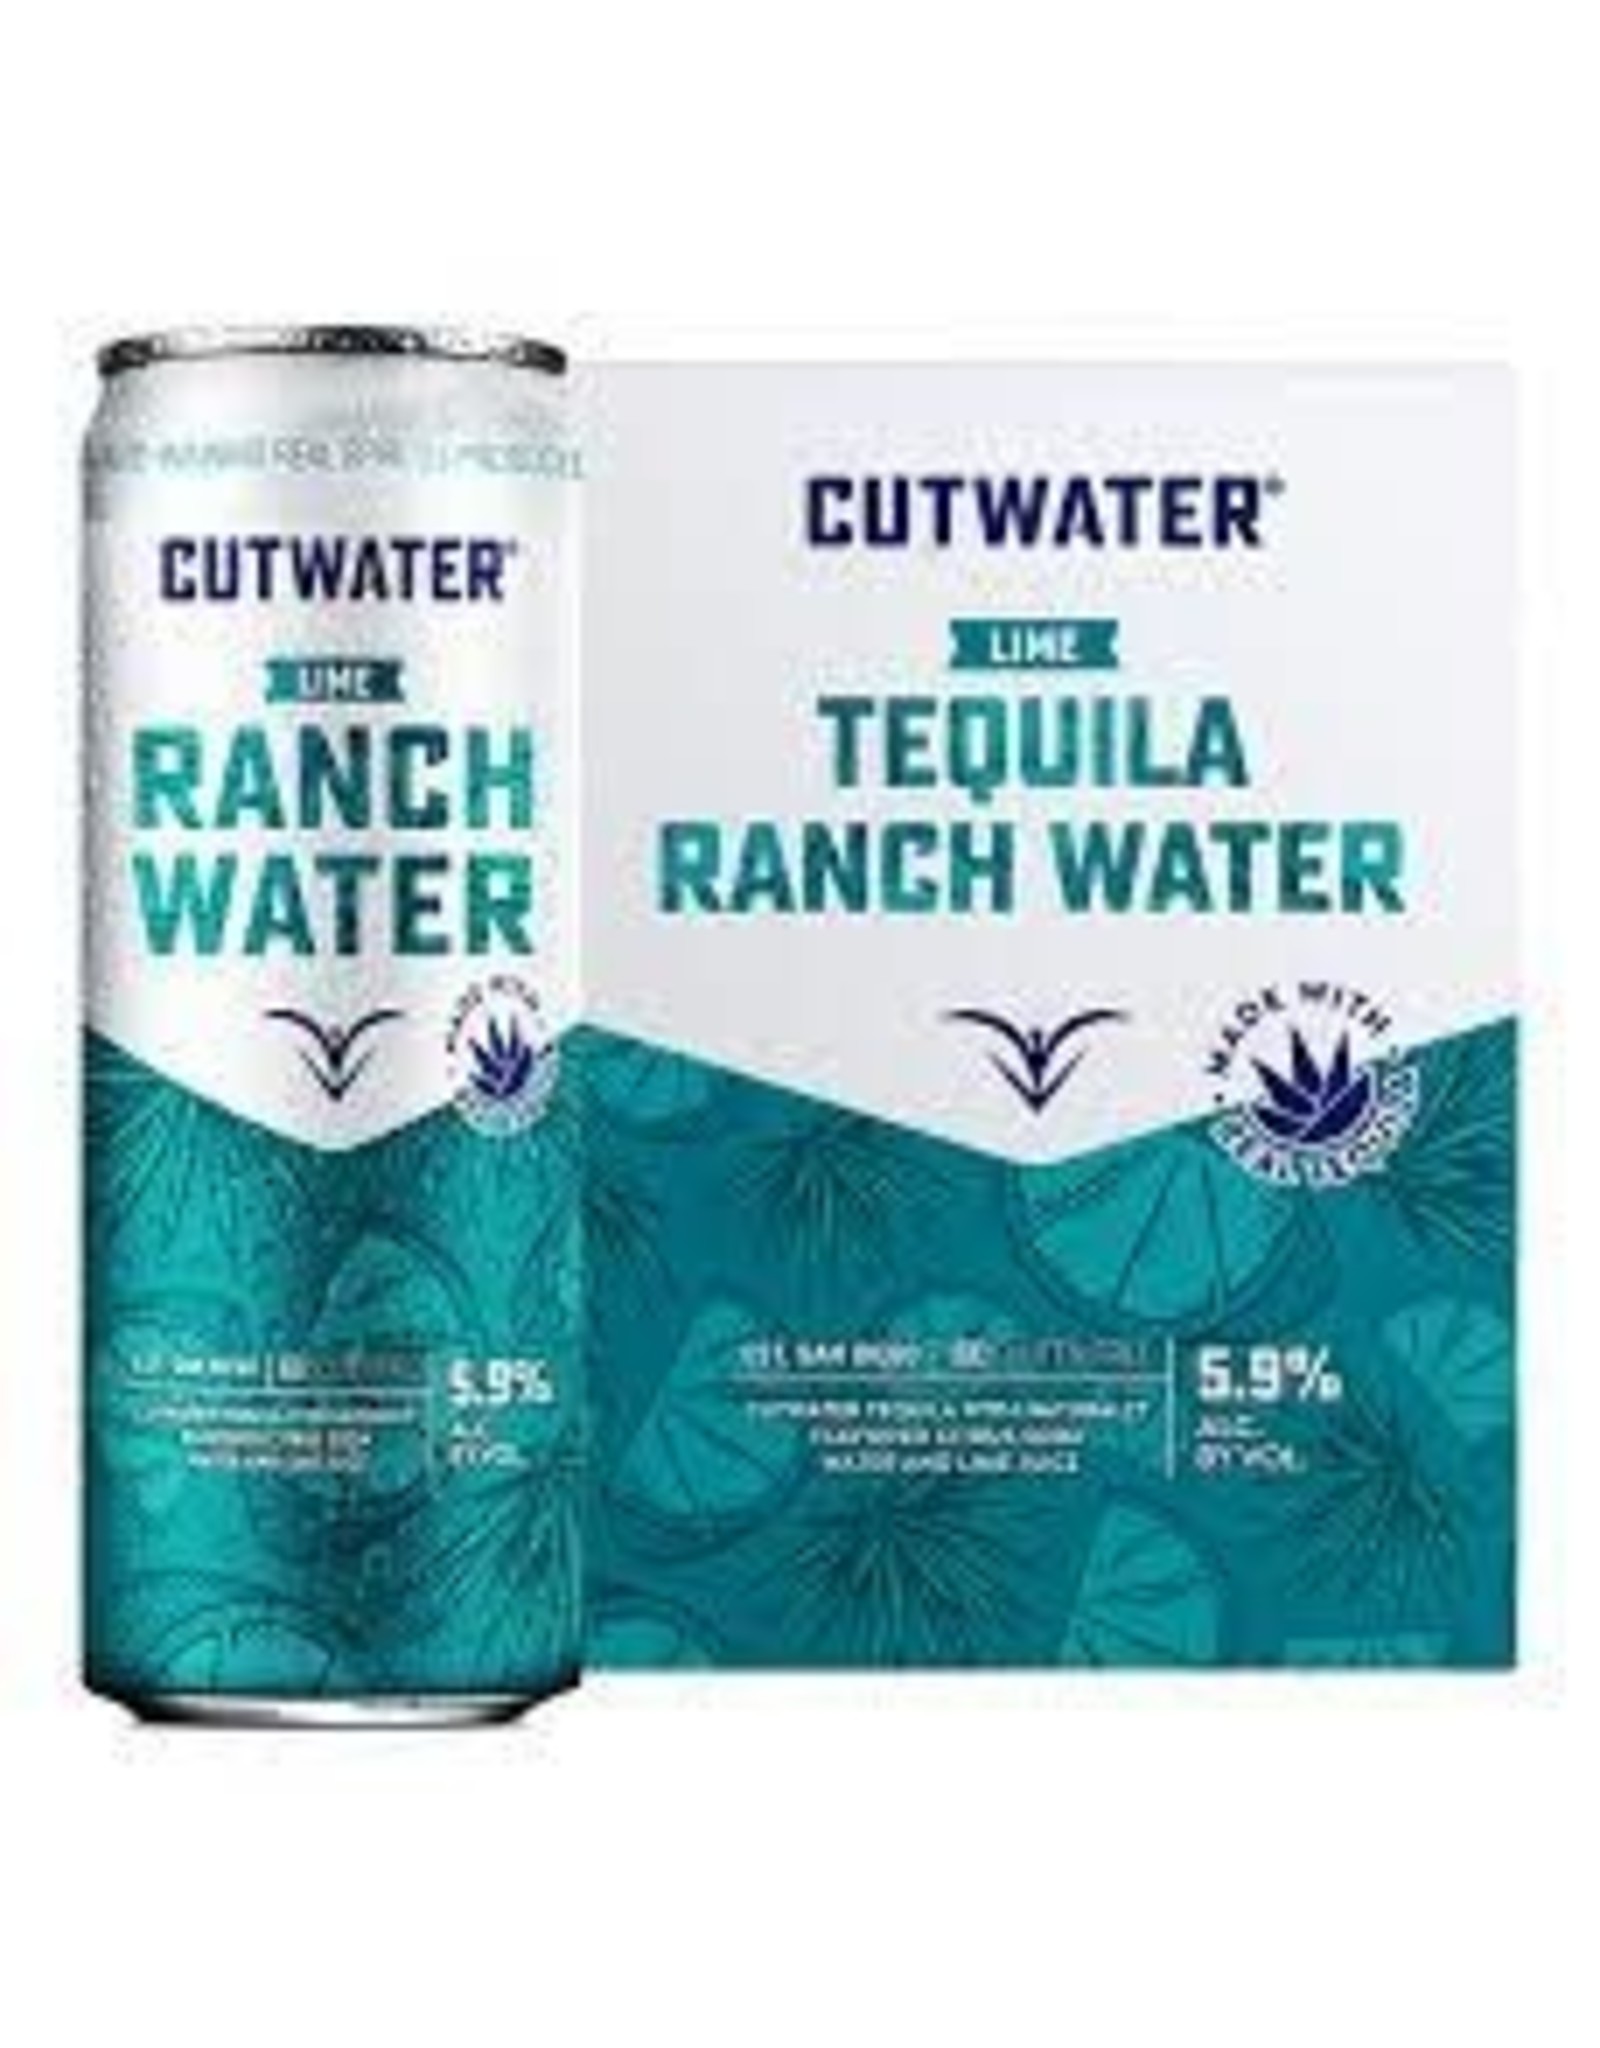 CUTWATER RANCH WATER